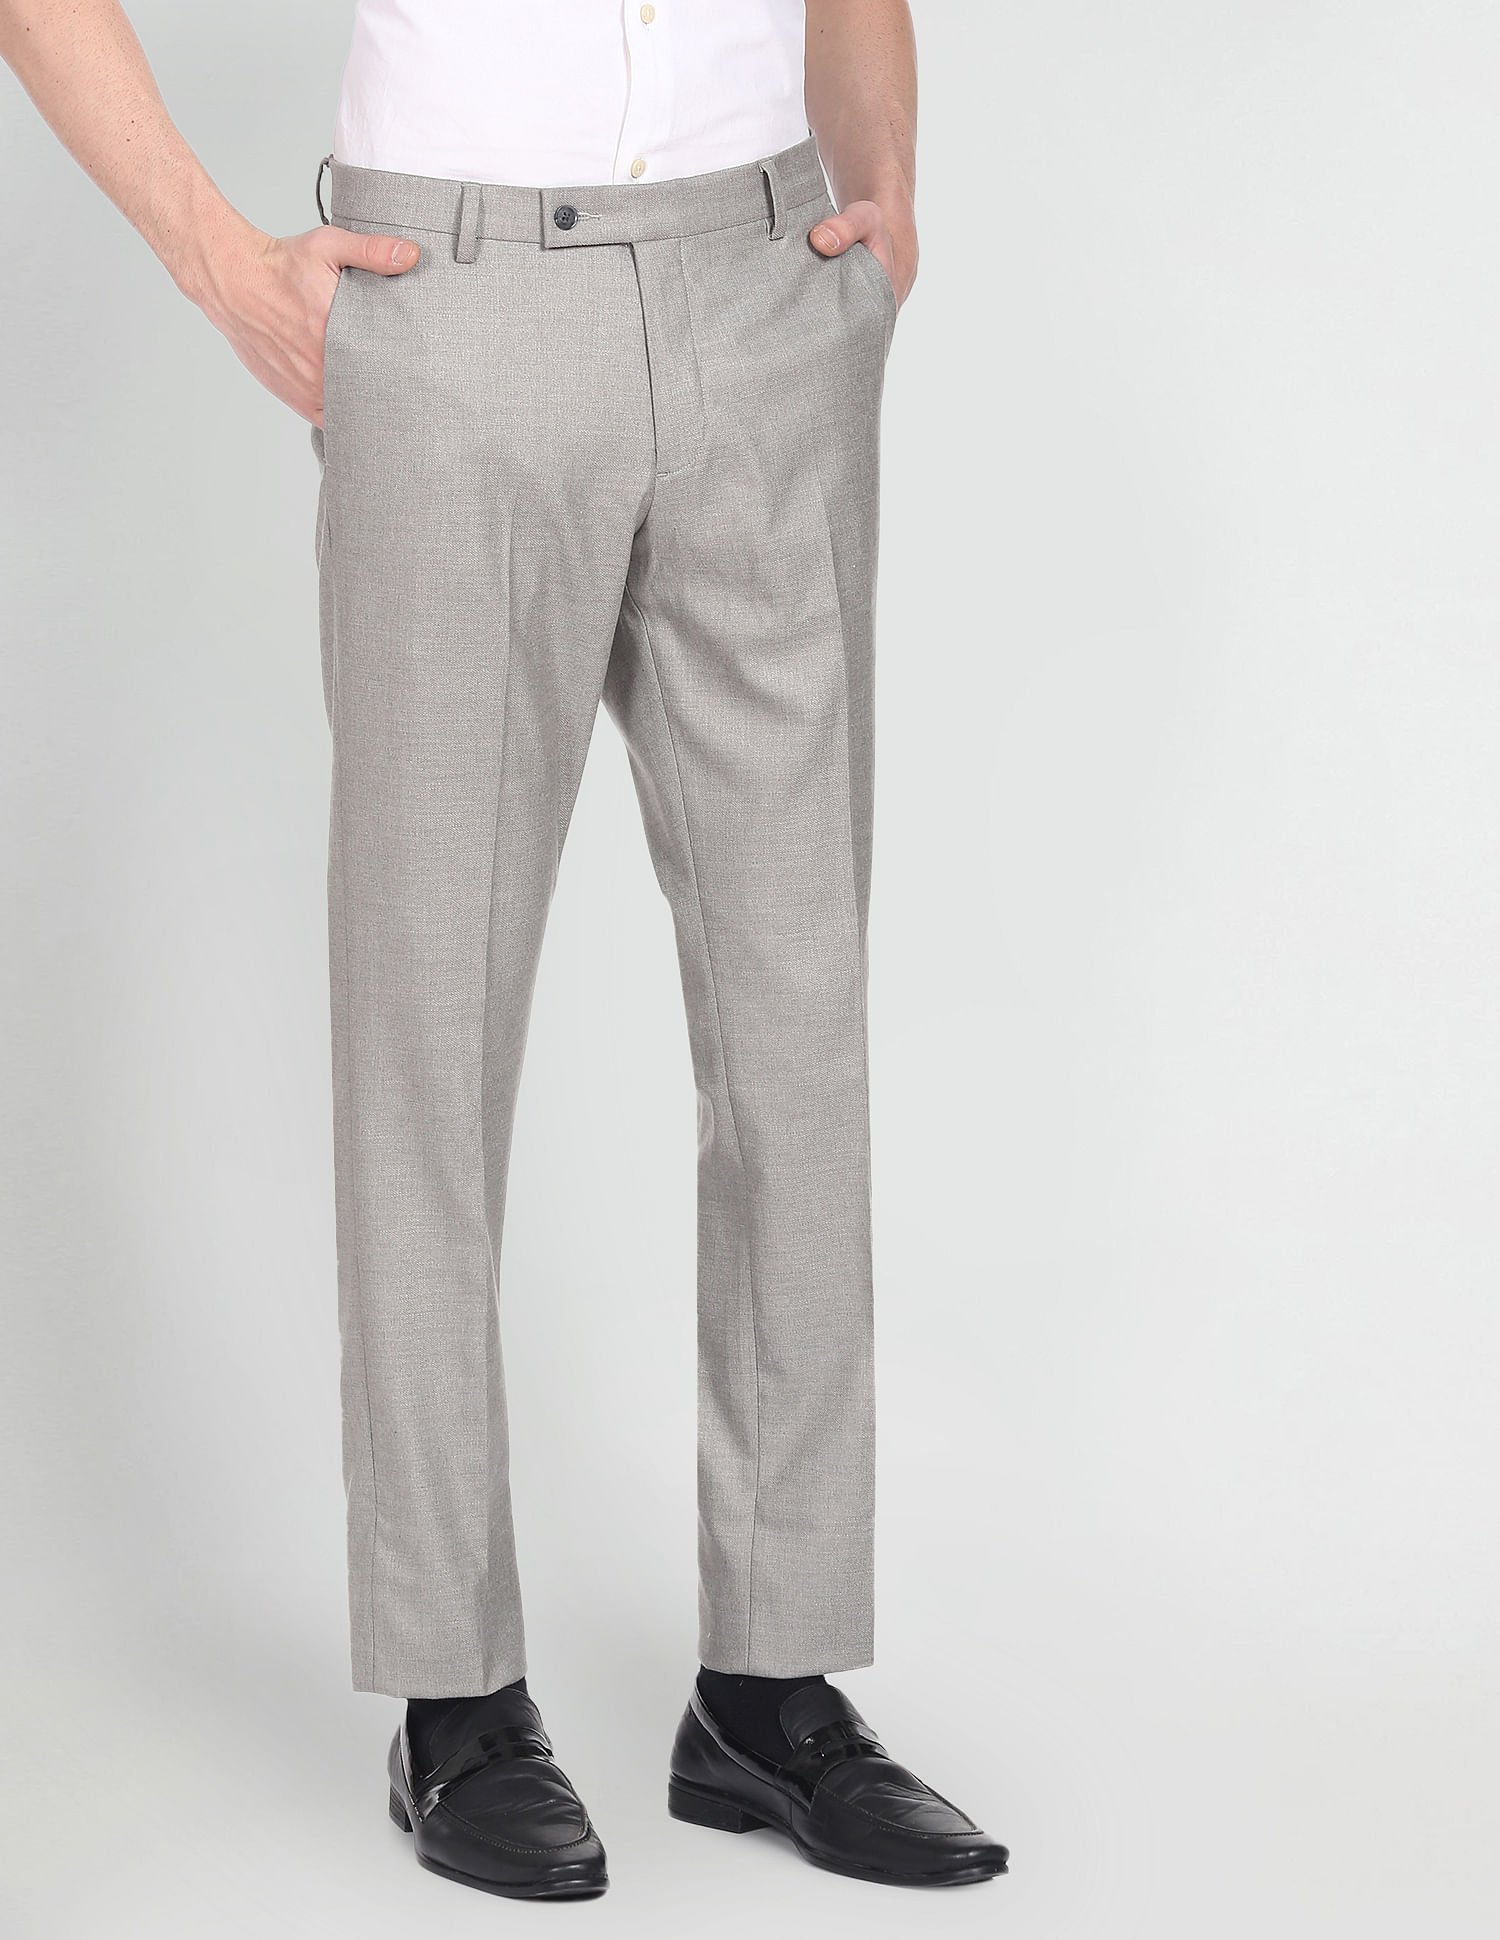 Grey Stretchable Formal Pants | Formaloutfit